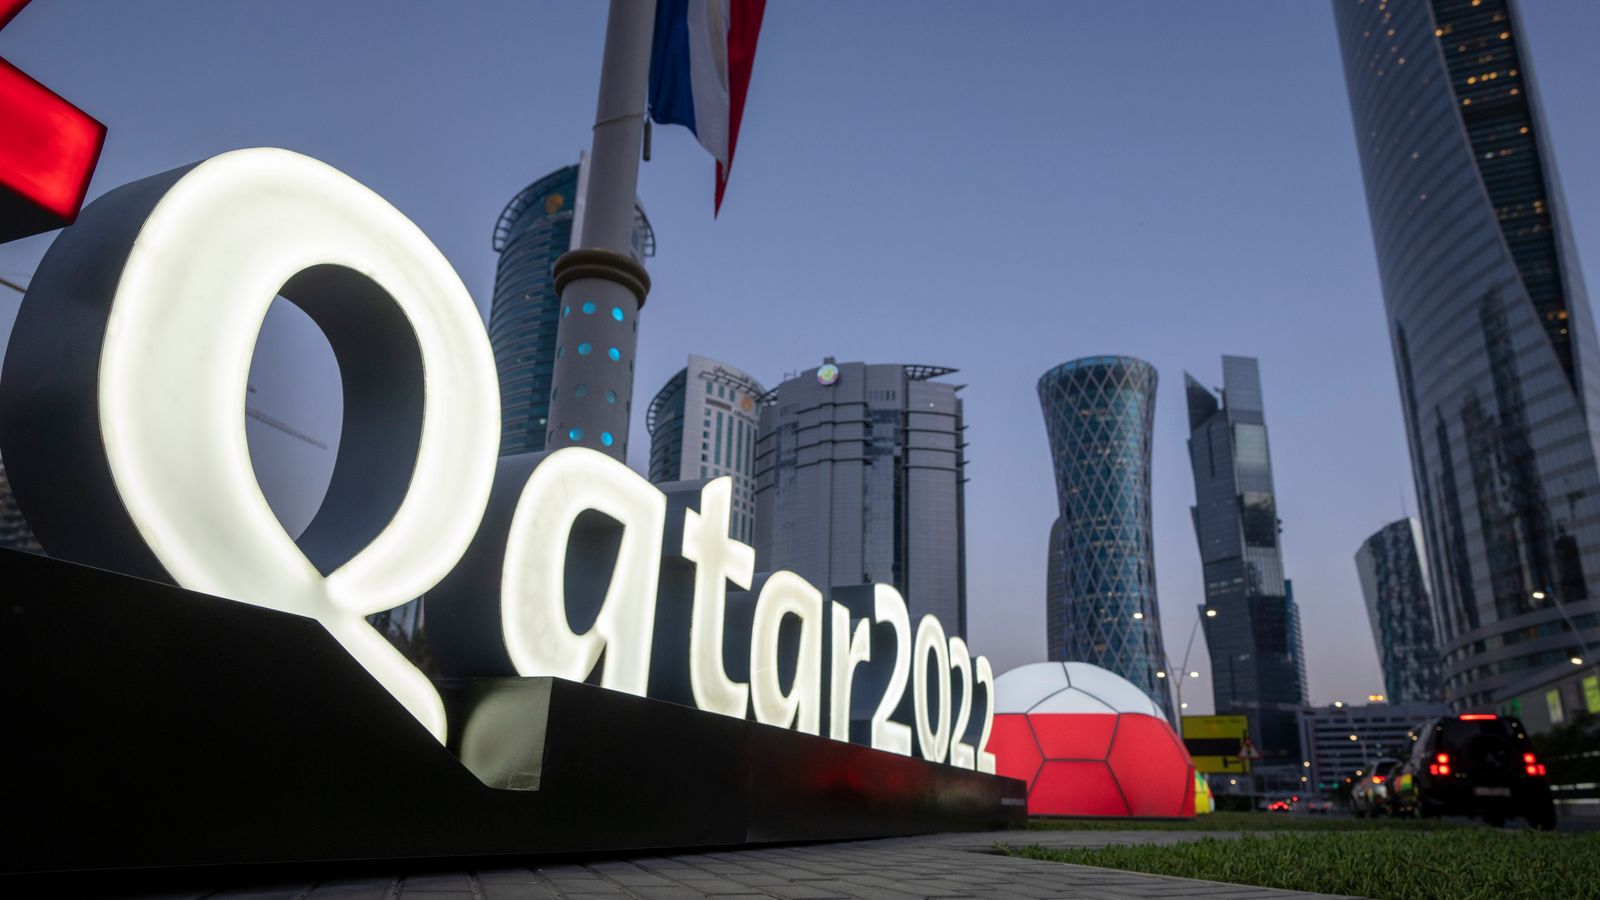 World Cup critics are 'arrogant' and 'cannot accept' Qatar as hosts, says foreign minister